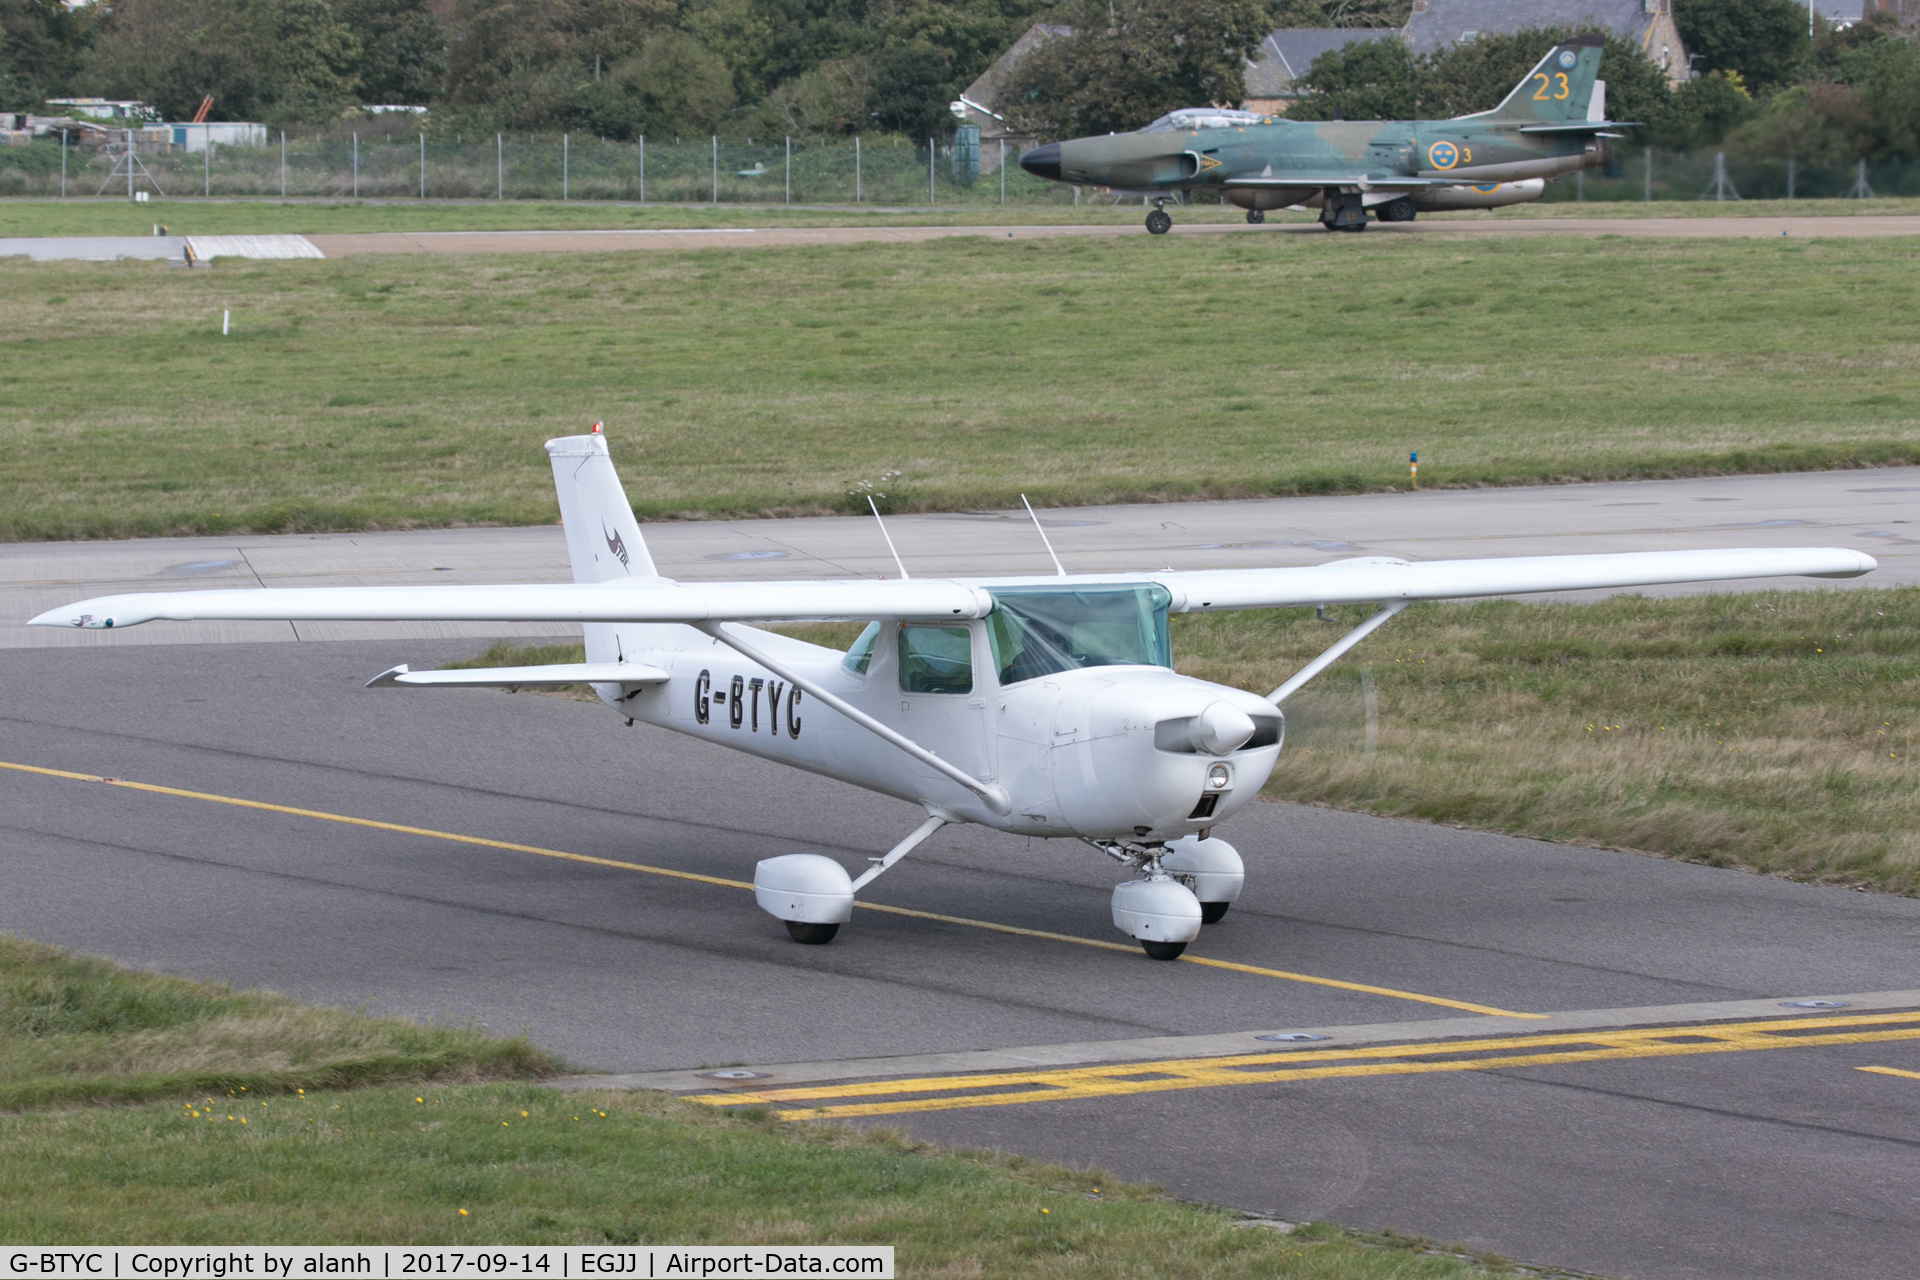 G-BTYC, 1975 Cessna 150L C/N 150-75767, Taxiing to the aero club at Jersey; the Swedish Historic Flight Lansen & Tunan are about to launch for a display rehearsal in the background.